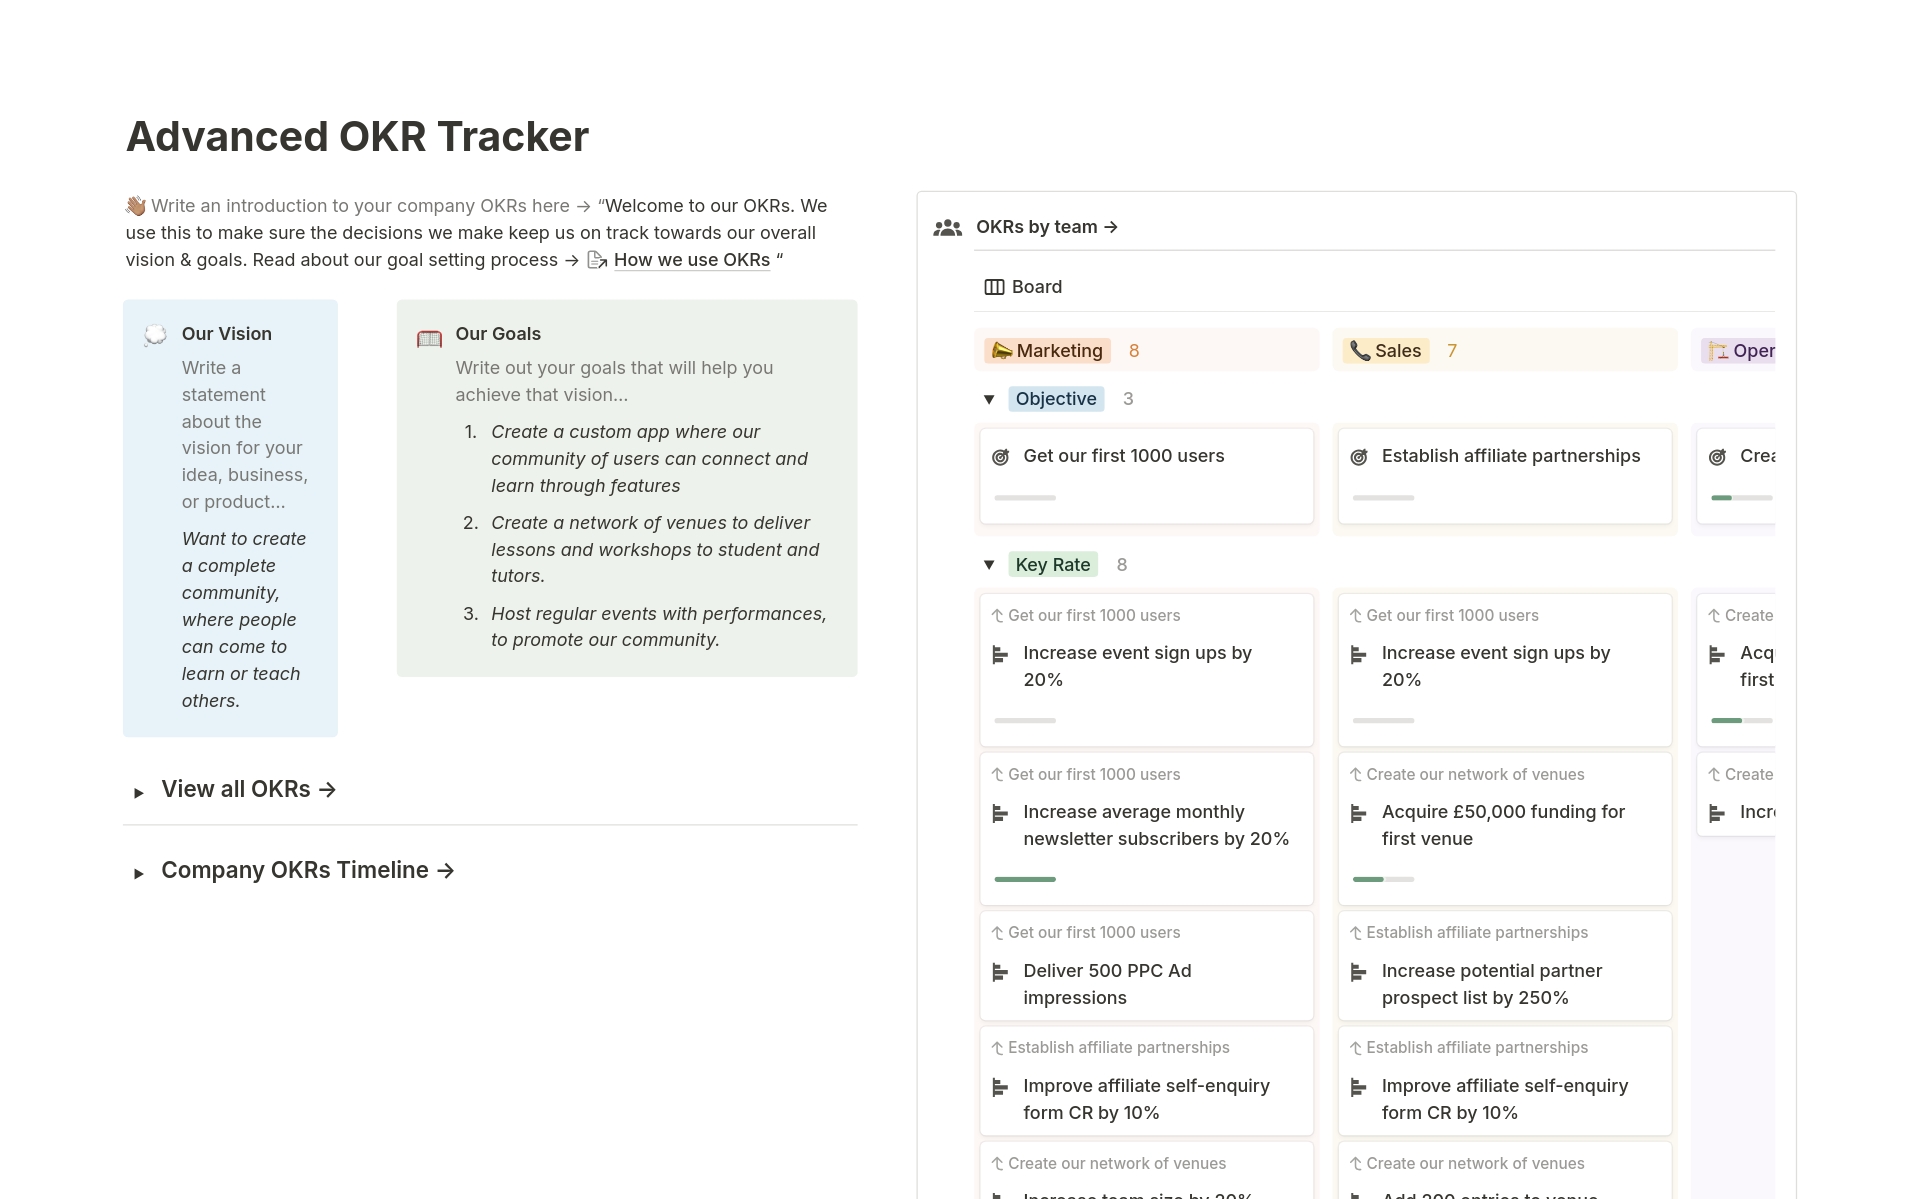 A more in depth approach to OKR management but still within a one page, concise view. Help teams stay on top of their relevant OKRs, and see how each is doing with a new progress tracker & timeline view to stay on top of dates.